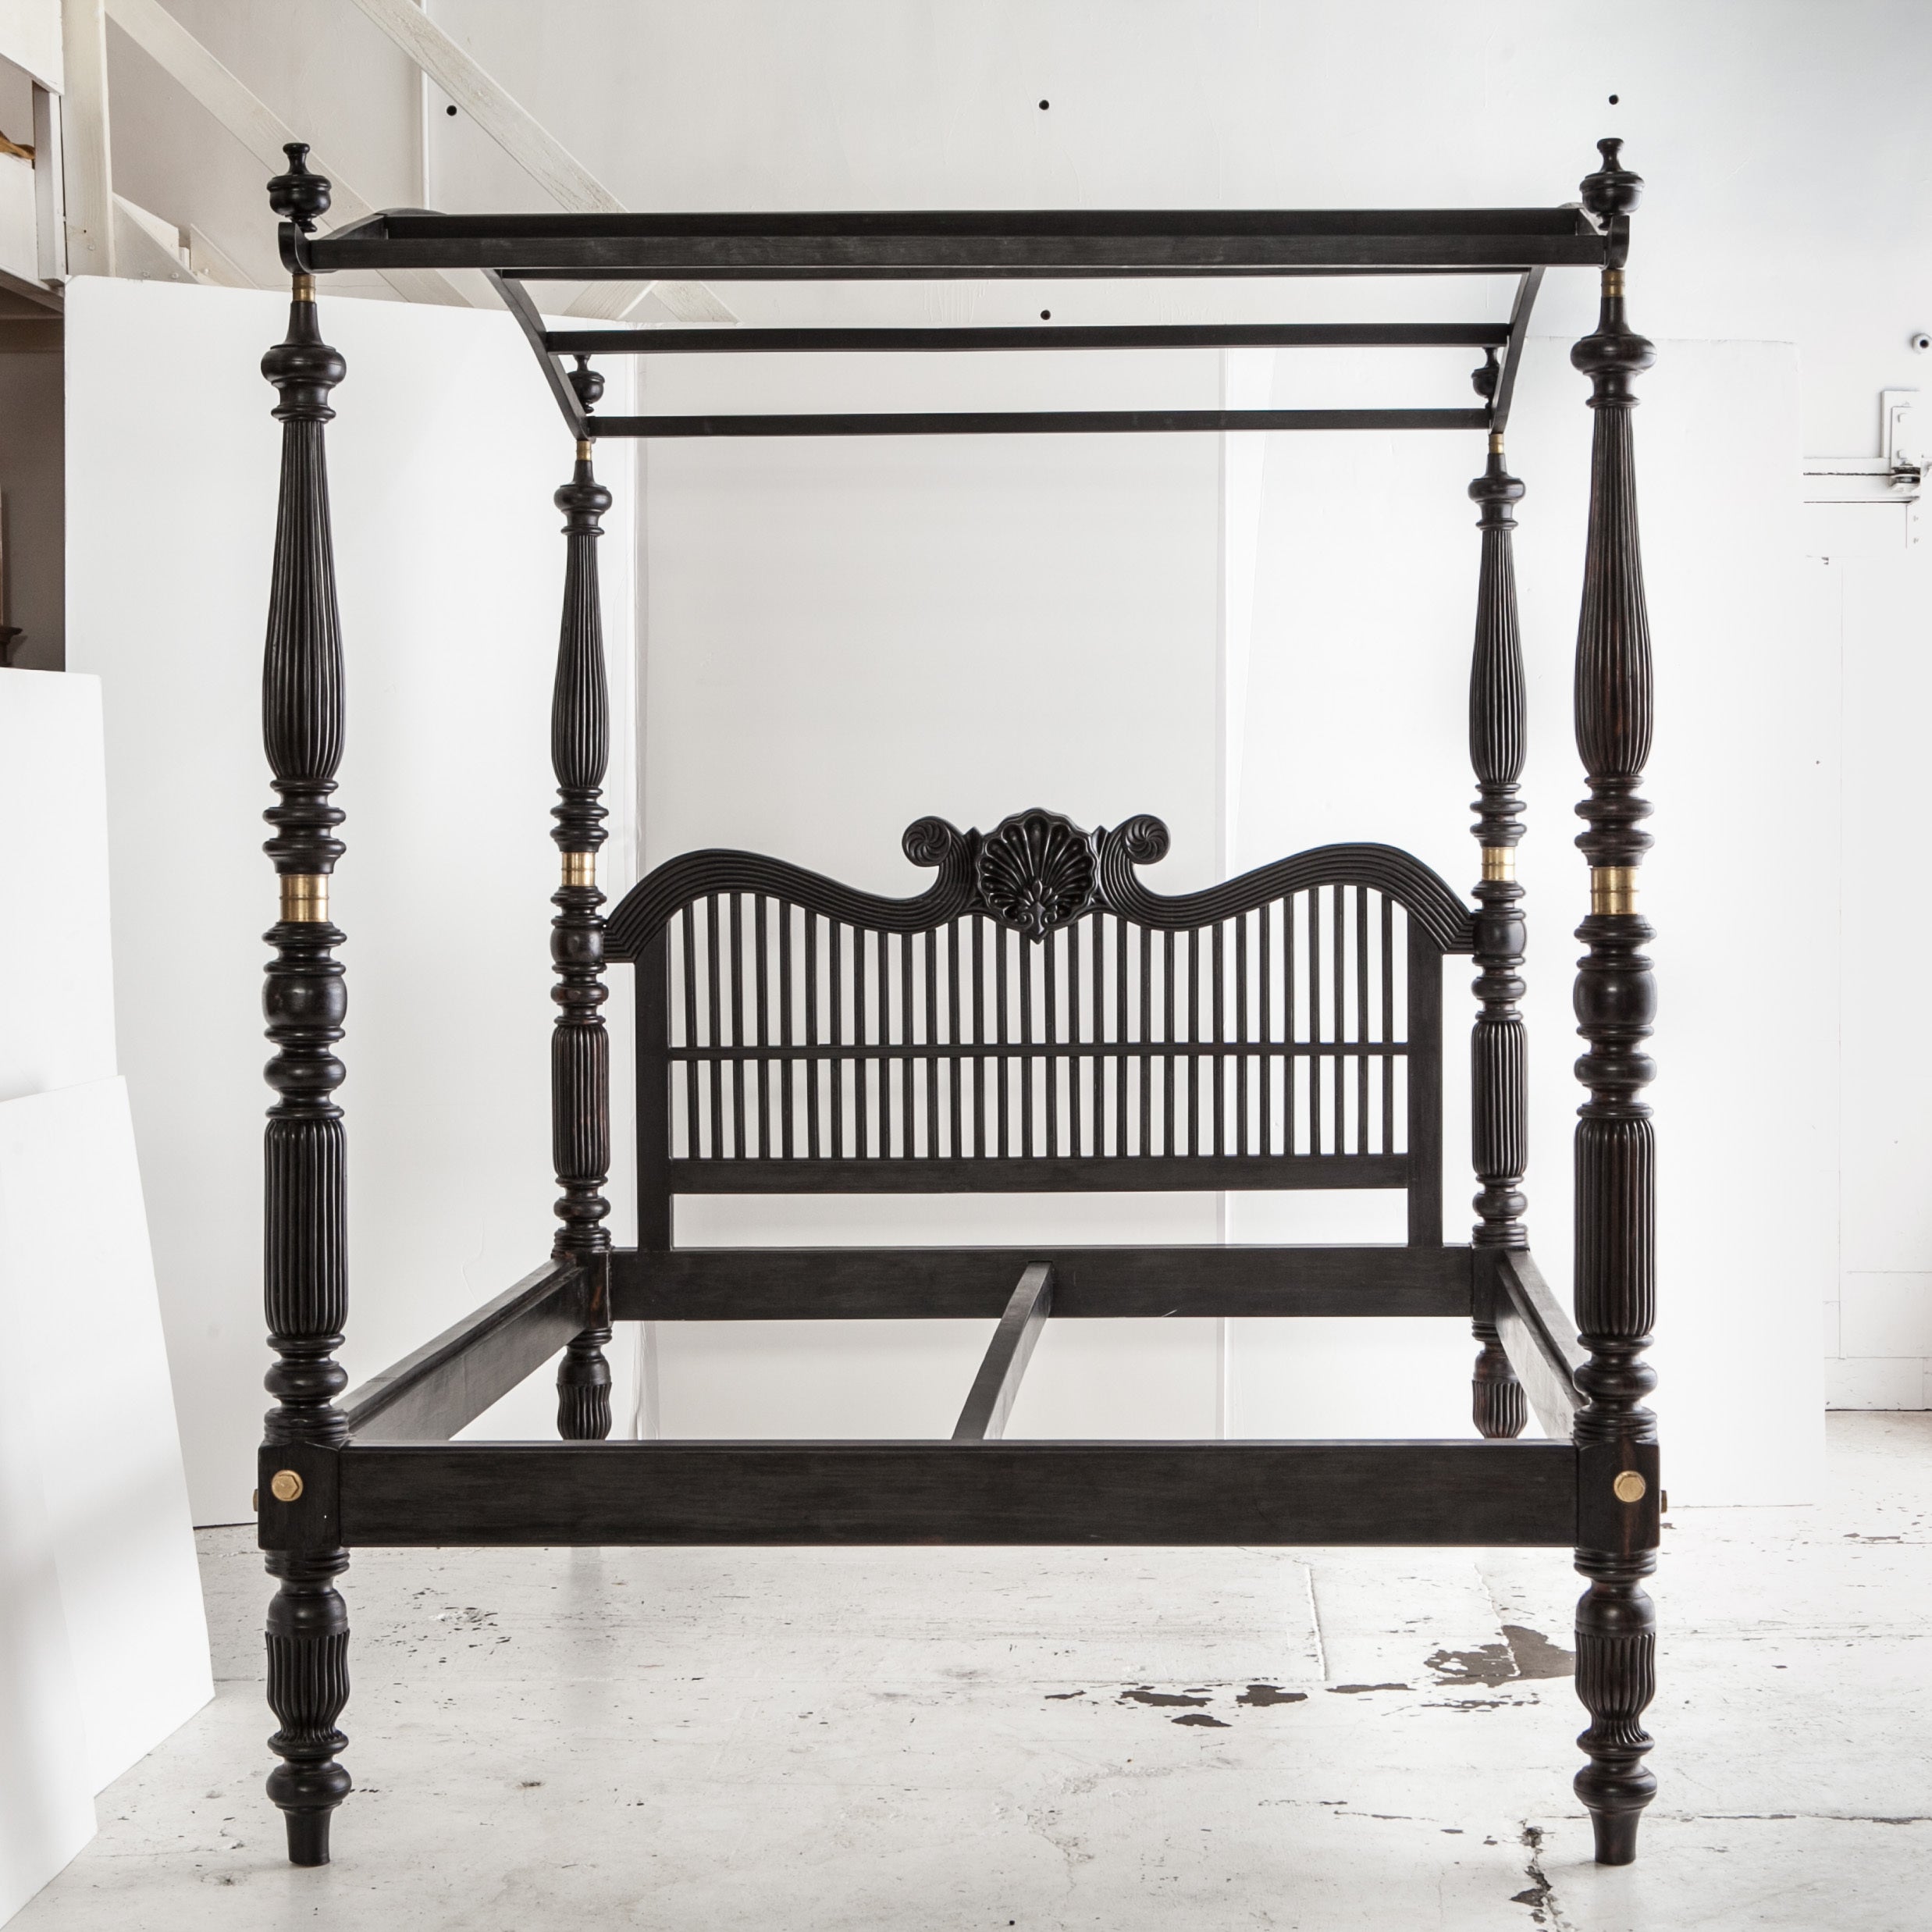 Indo-Dutch Ebony Bed with Canopy, 19th C.